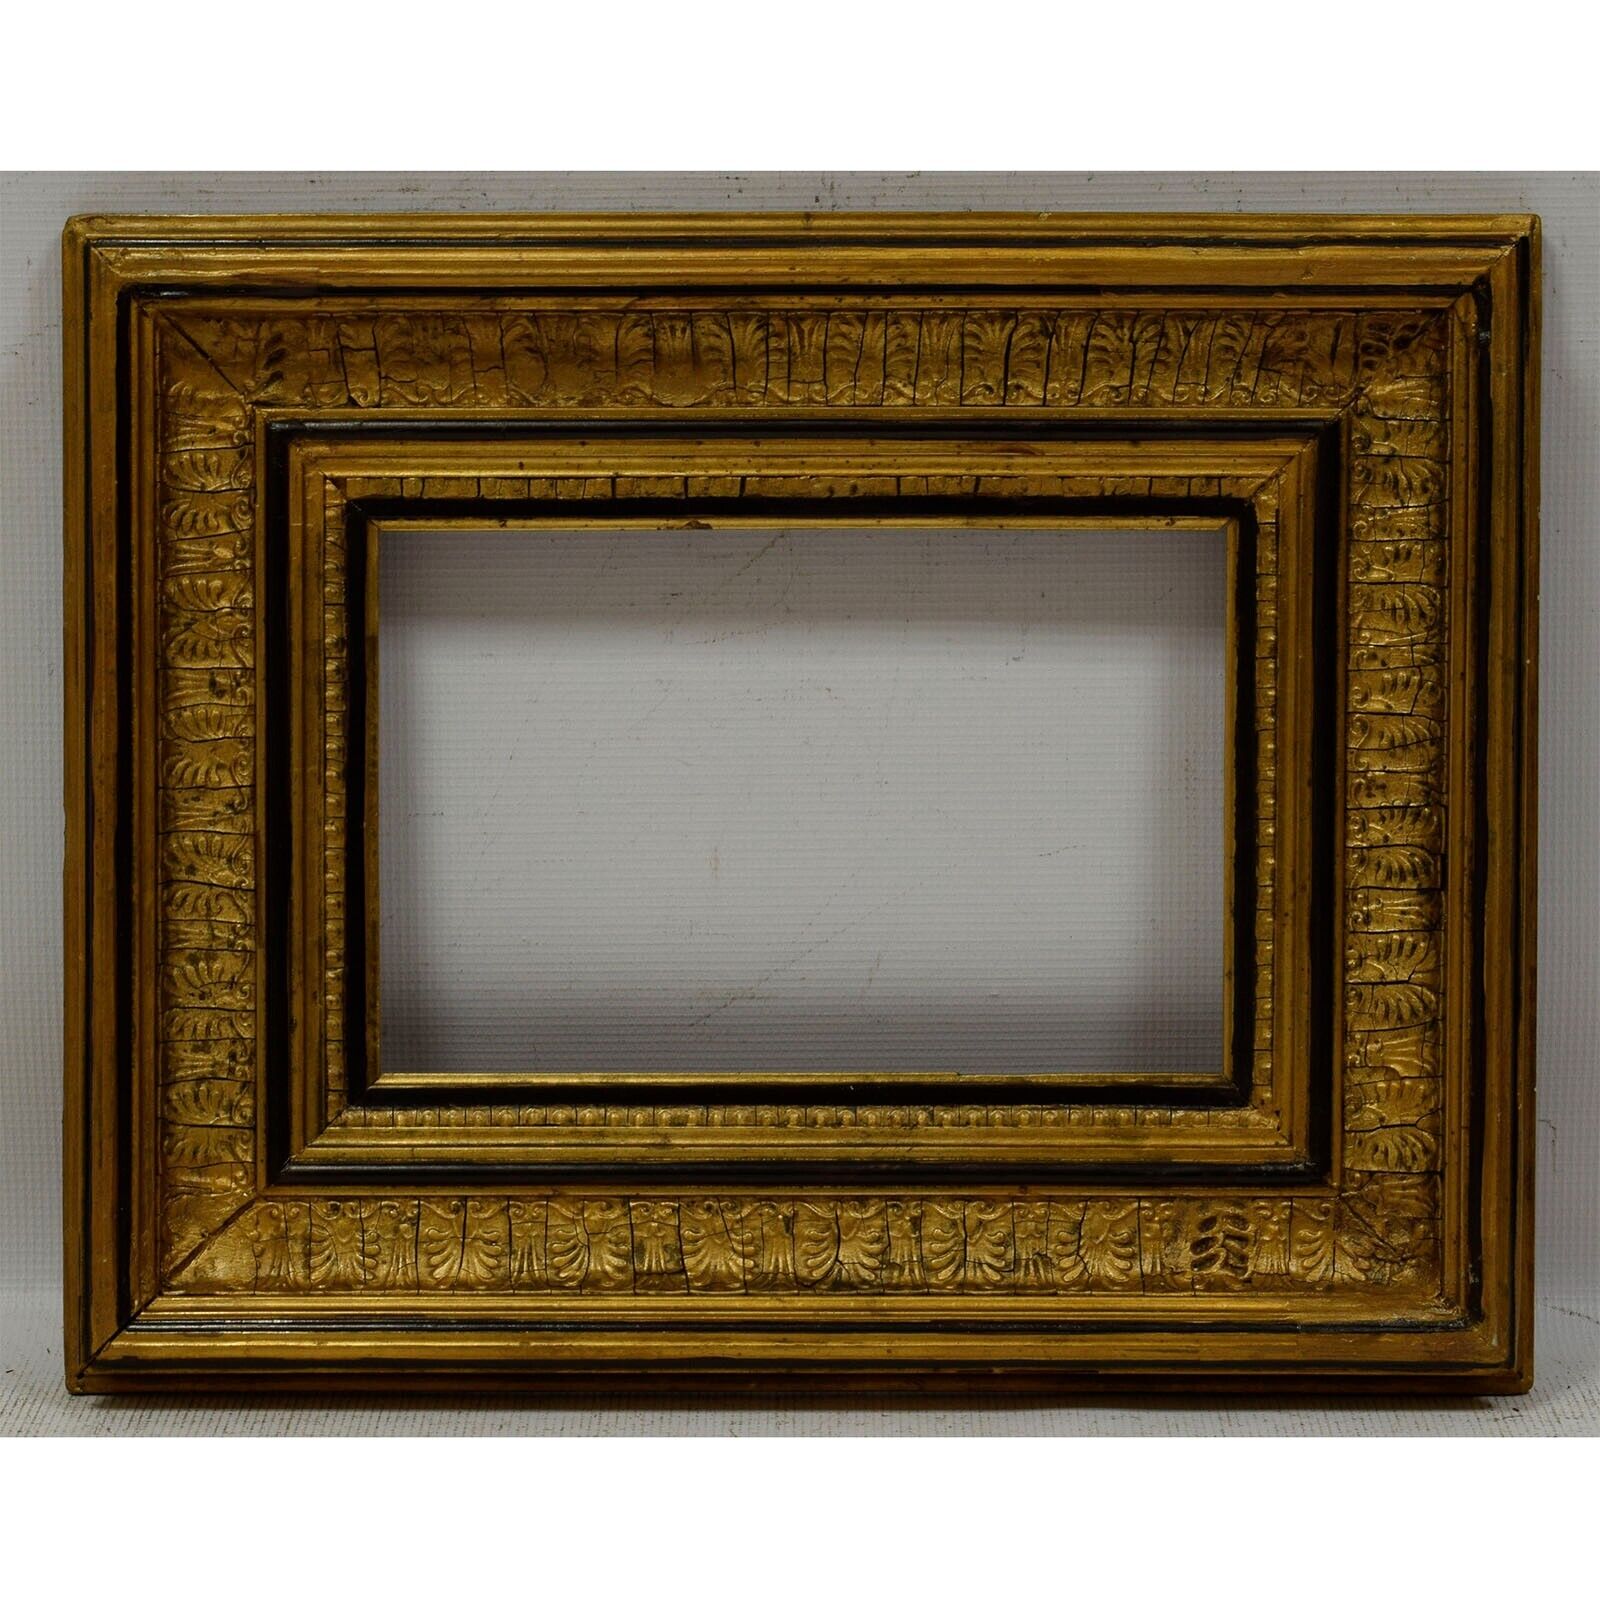 Ca 1850-1900 Old wooden frame Original condition Internal: 12x8,2in